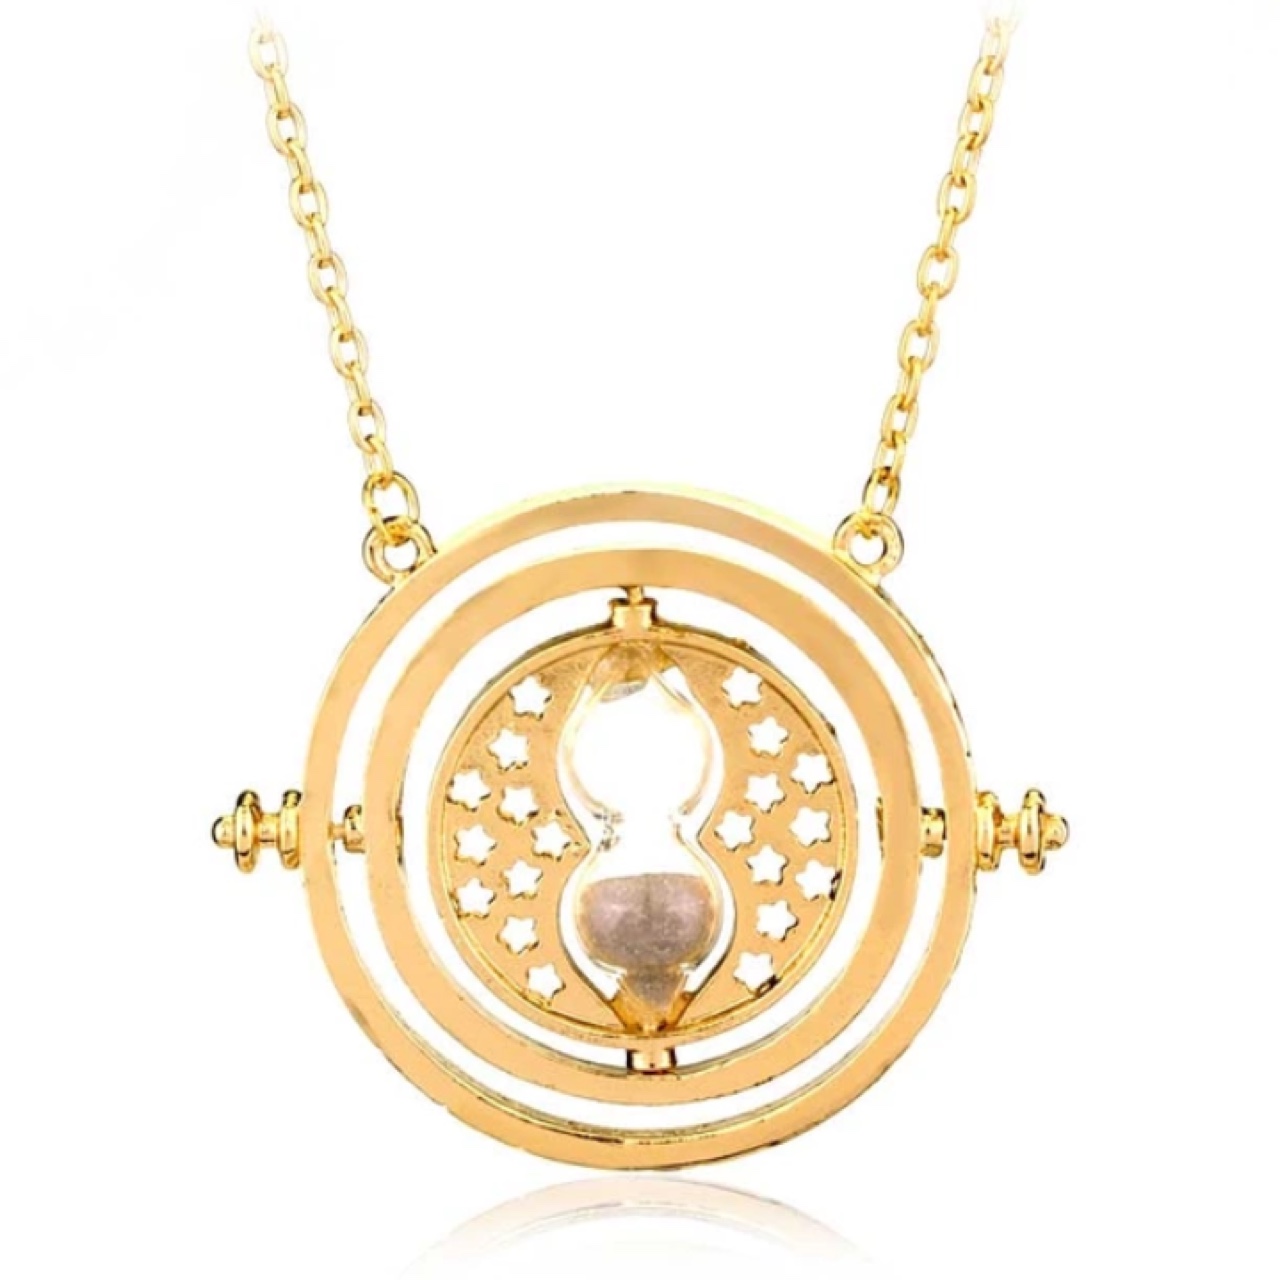 Harry Potter Time Turner Necklace 1:1 Scale Replica by Noble Collection